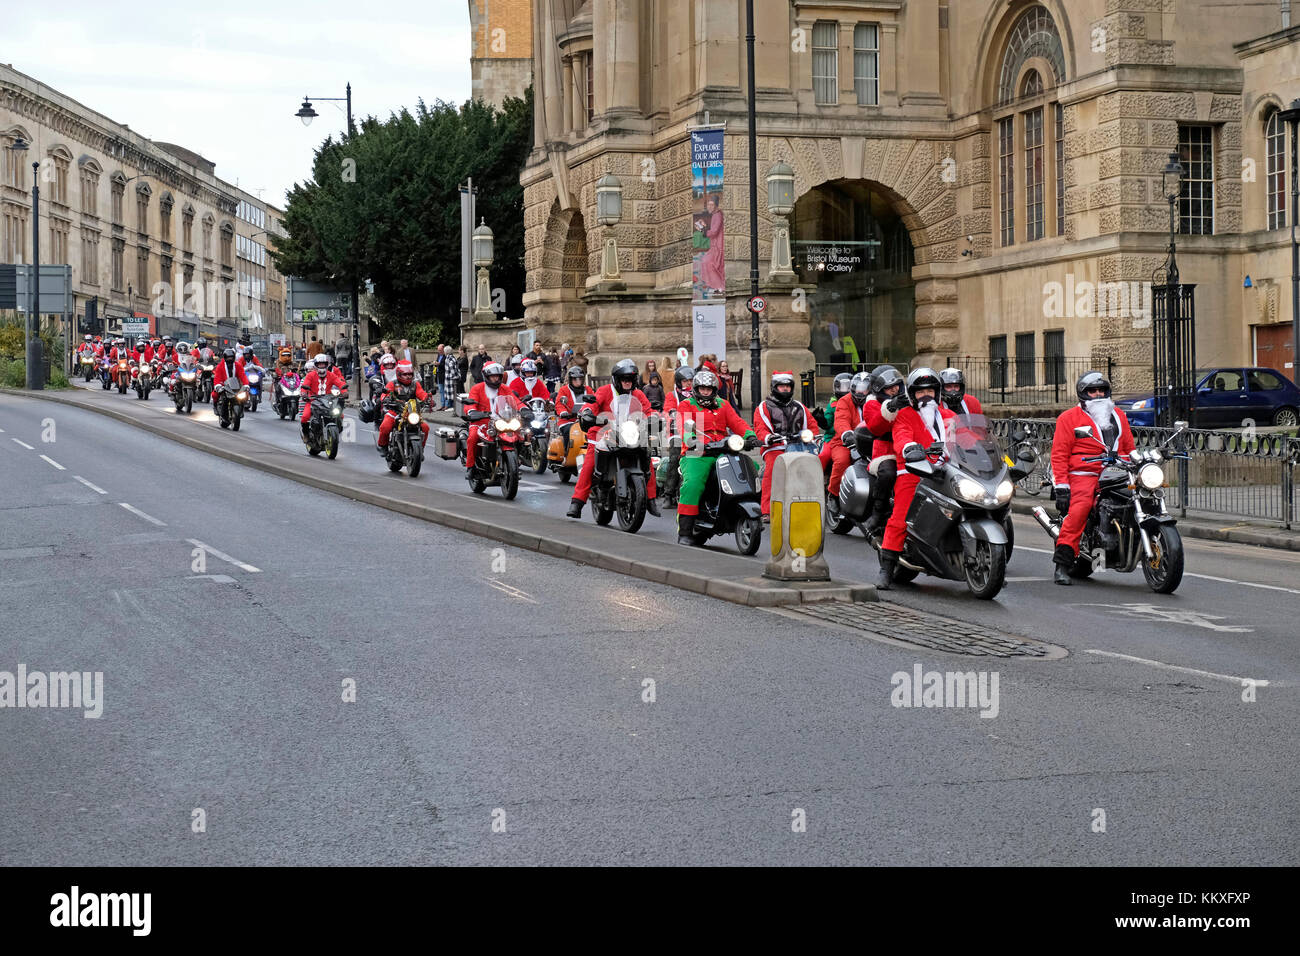 Bristol, UK. 2nd December, 2017. Motorcyclists dressed as Santa Claus ride through the city centre. The riders aimed to raise £10,000 for Children’s Hospice South West’s facility at Charlton Farm in Wraxall, Somerset, a few miles to the south of Bristol. Keith Ramsey/Alamy Live News Stock Photo